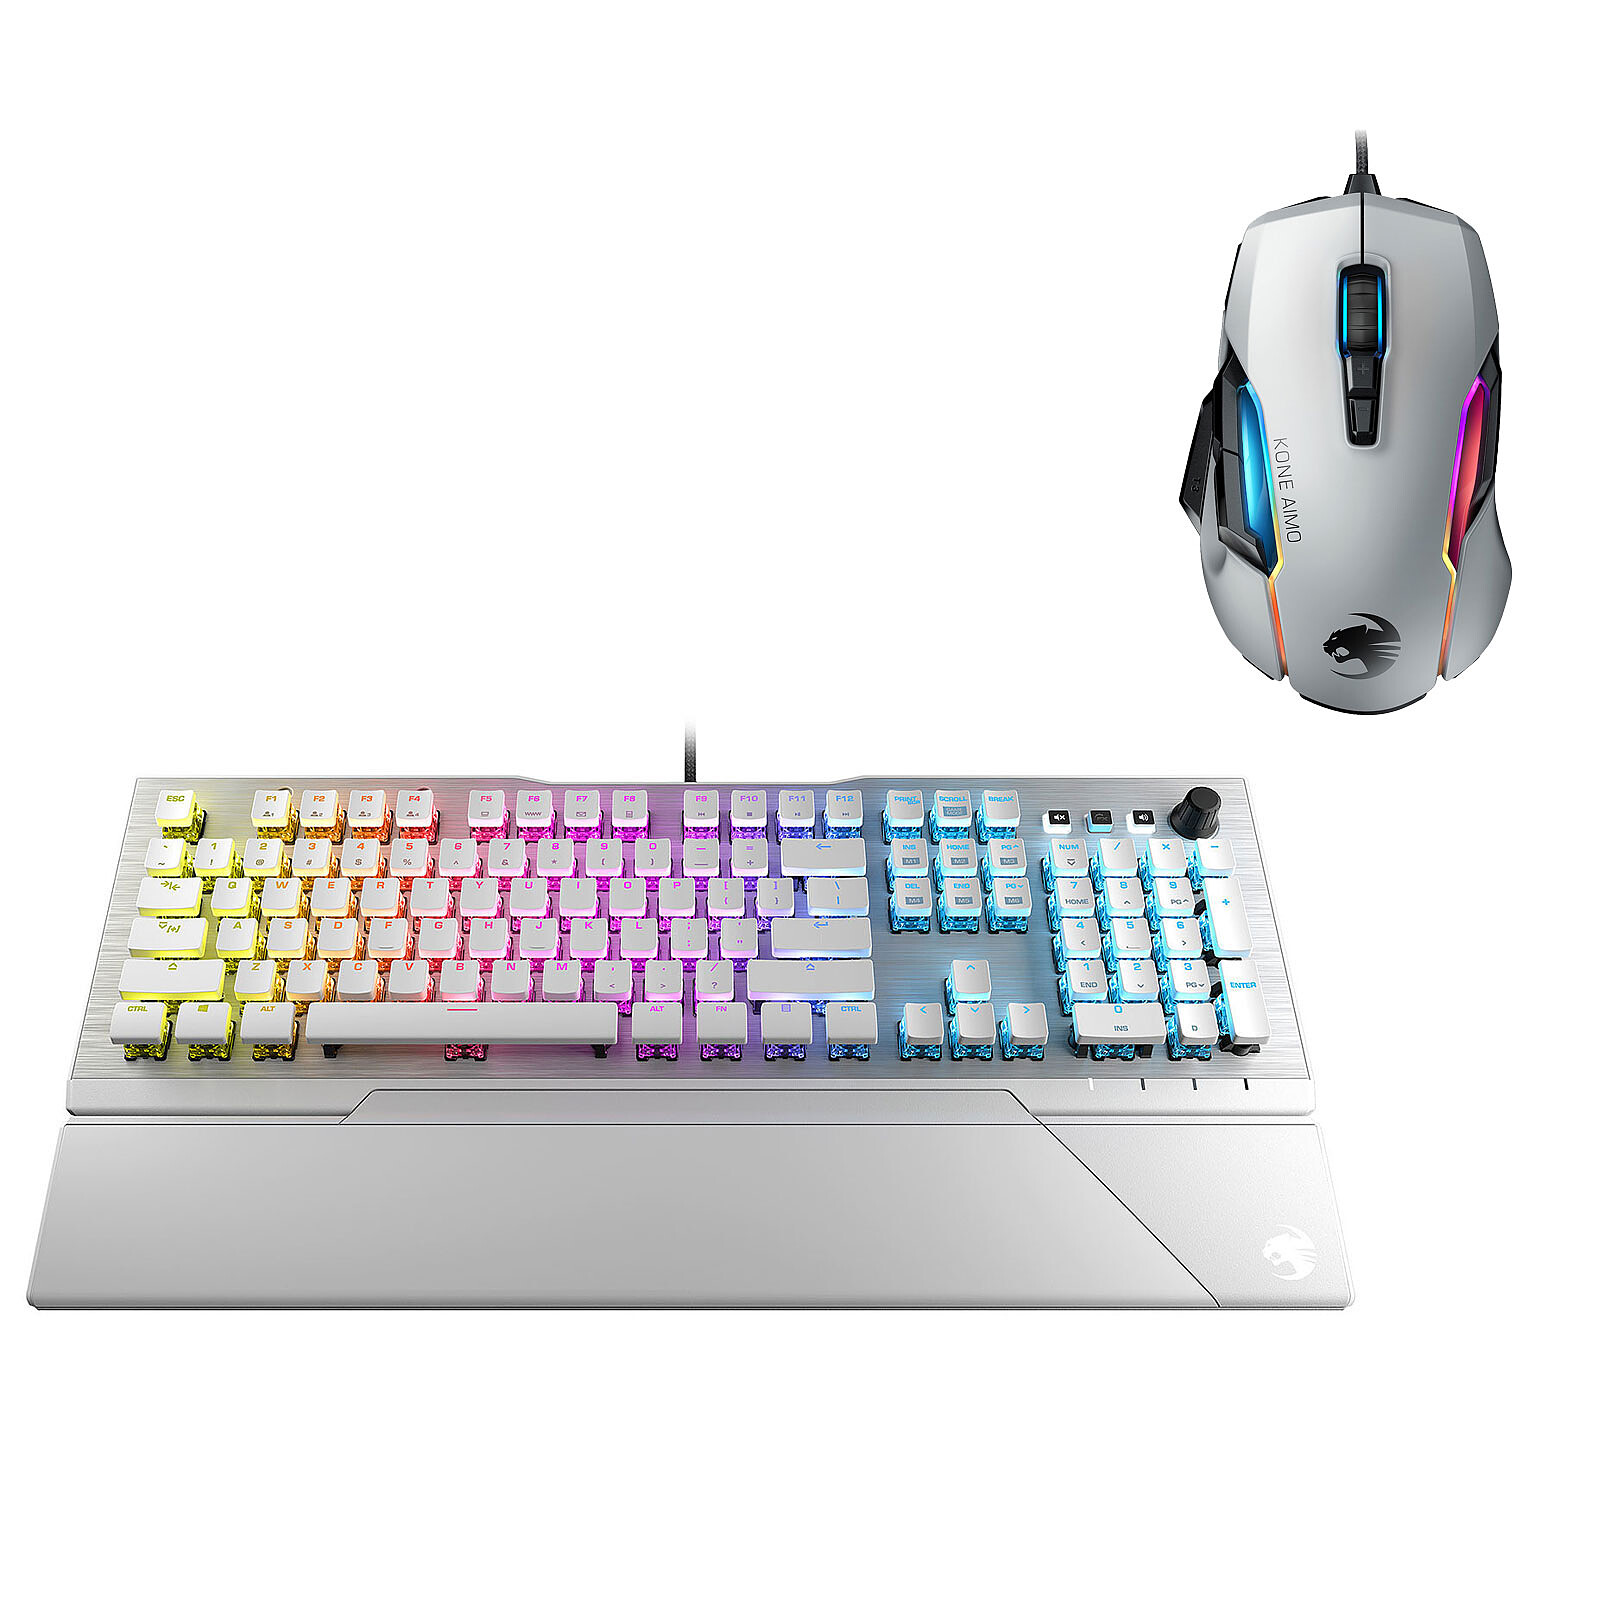 Roccat Vulcan 122 Aimo Kone Aimo Remastered Keyboard Mouse Set Roccat On Ldlc